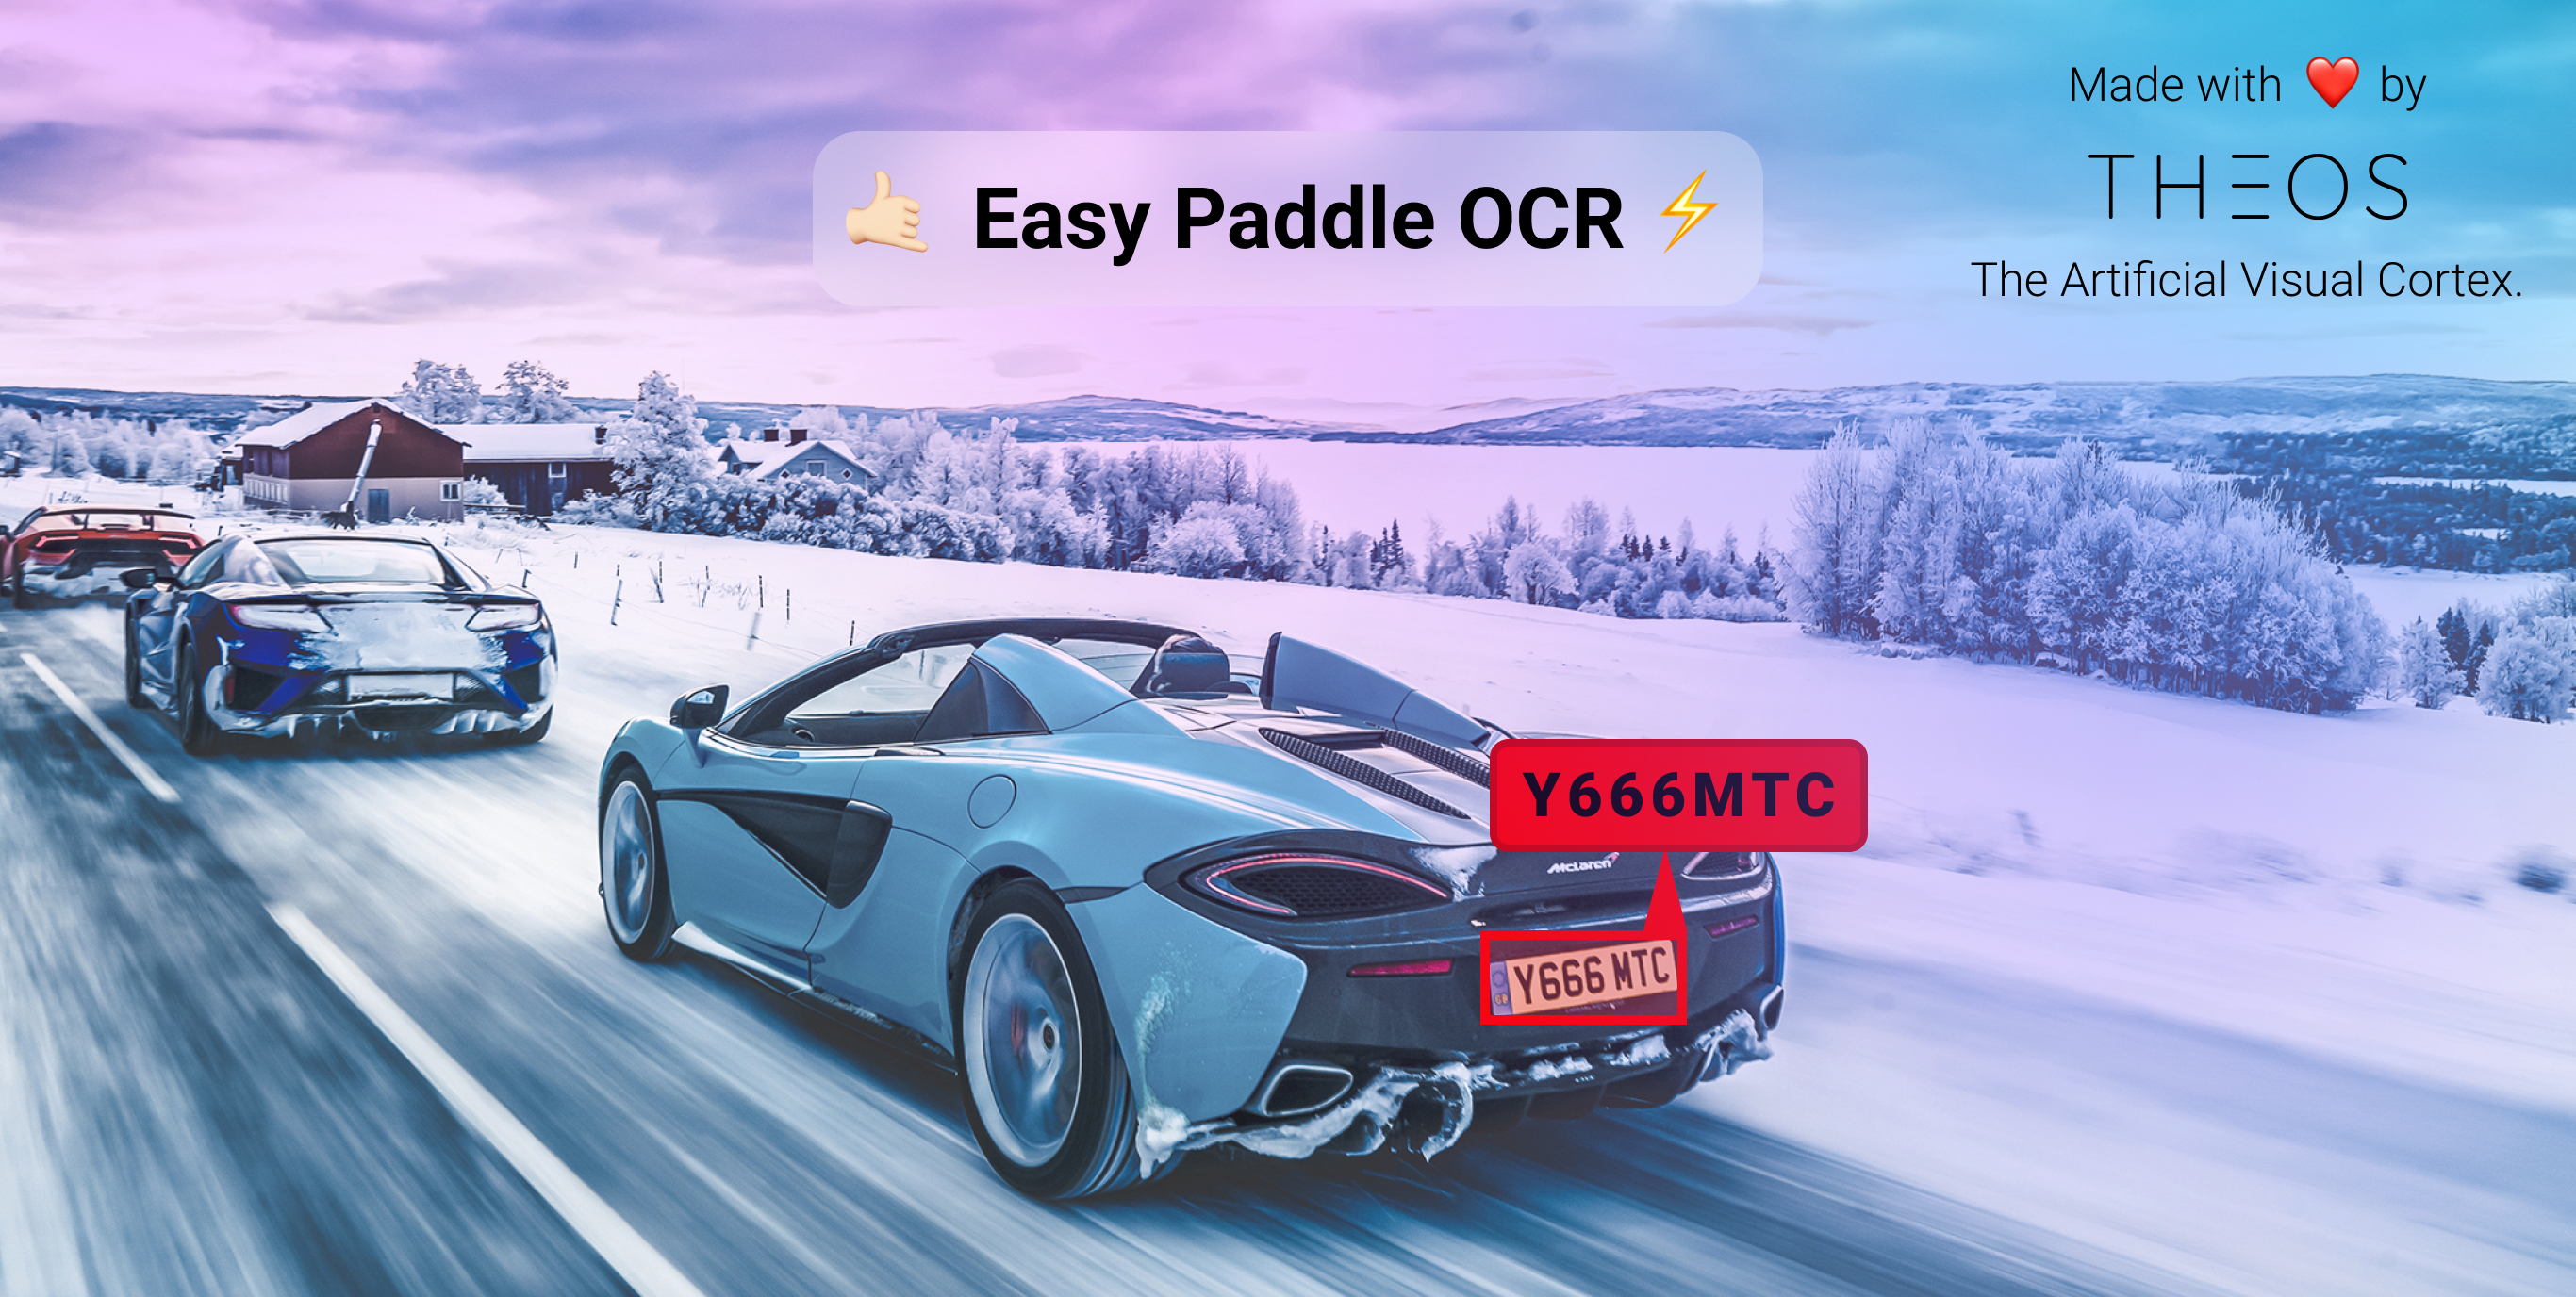 Easy Paddle OCR by Theos AI